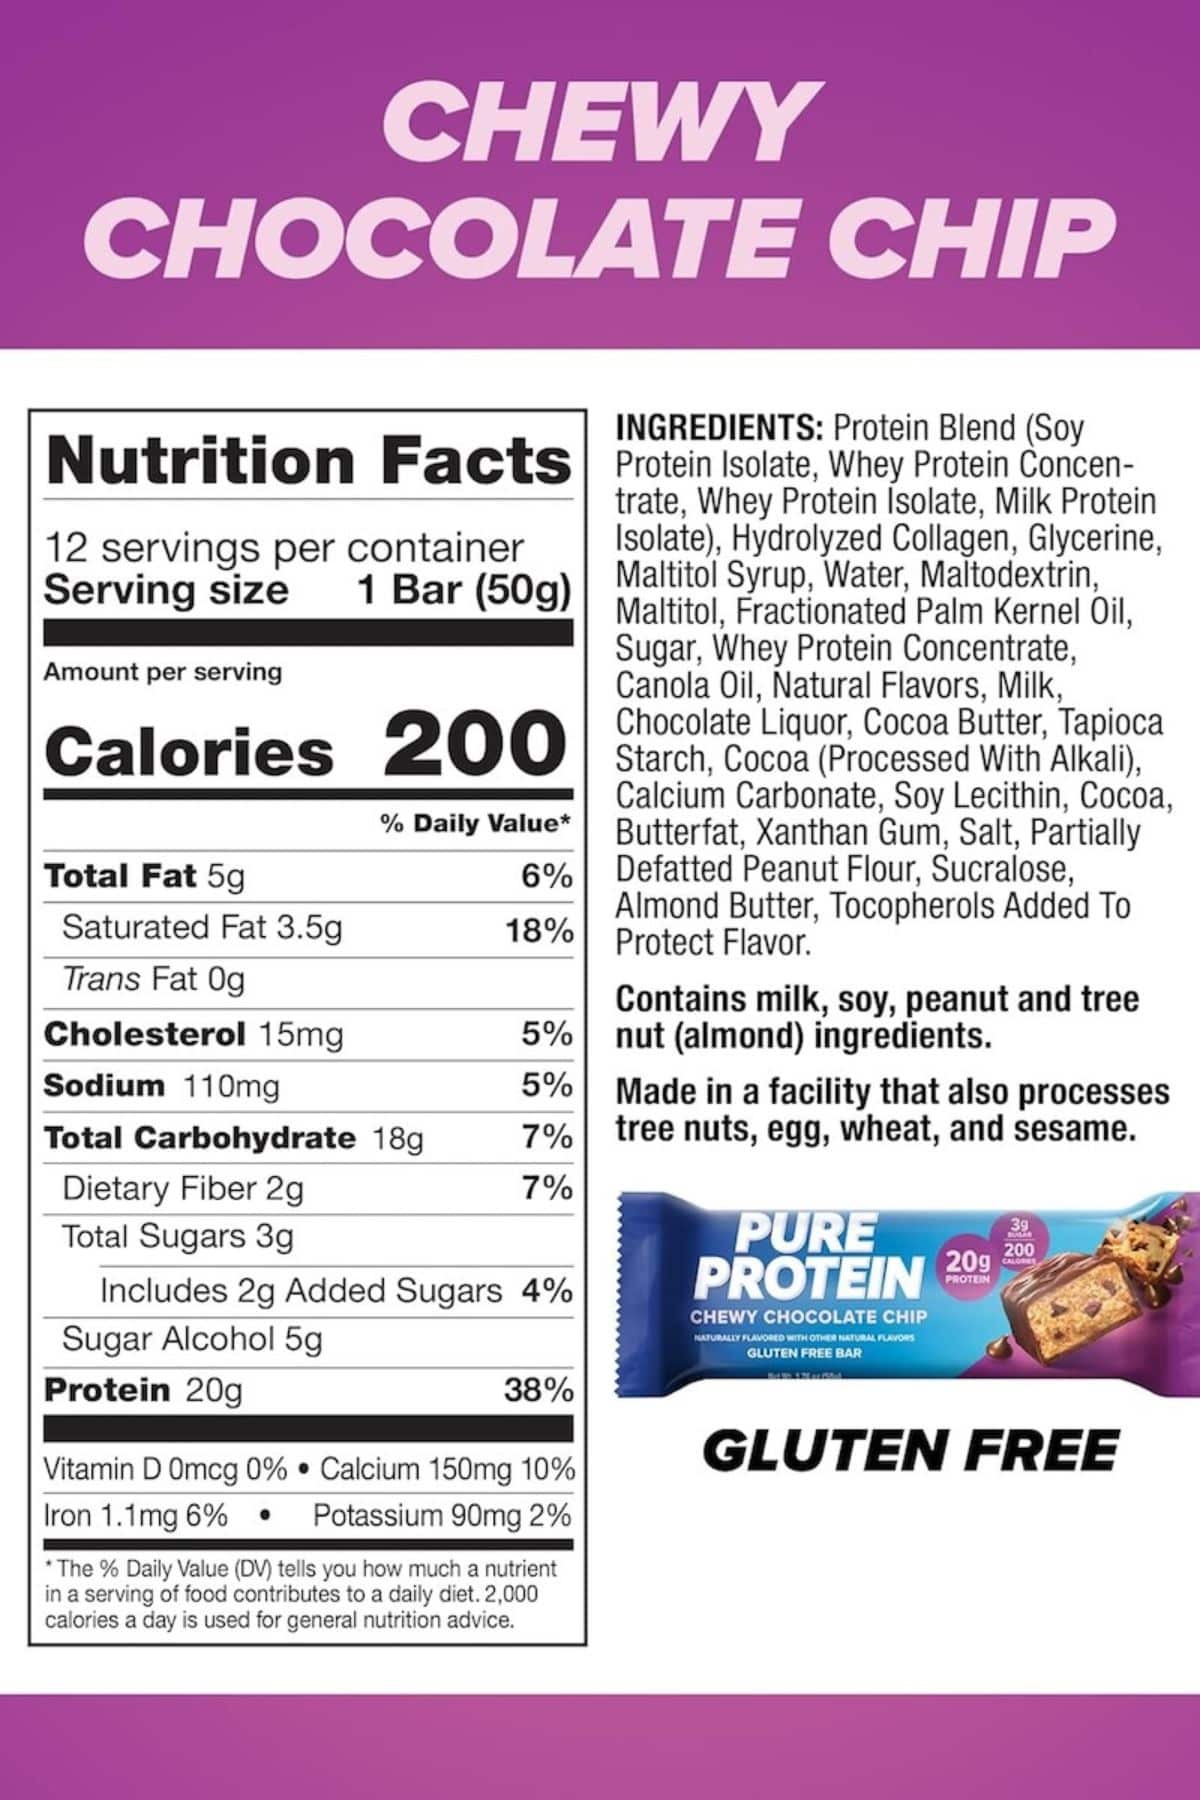 the nutrition label for Chewy Chocolate Chip Pure Protein Bars.